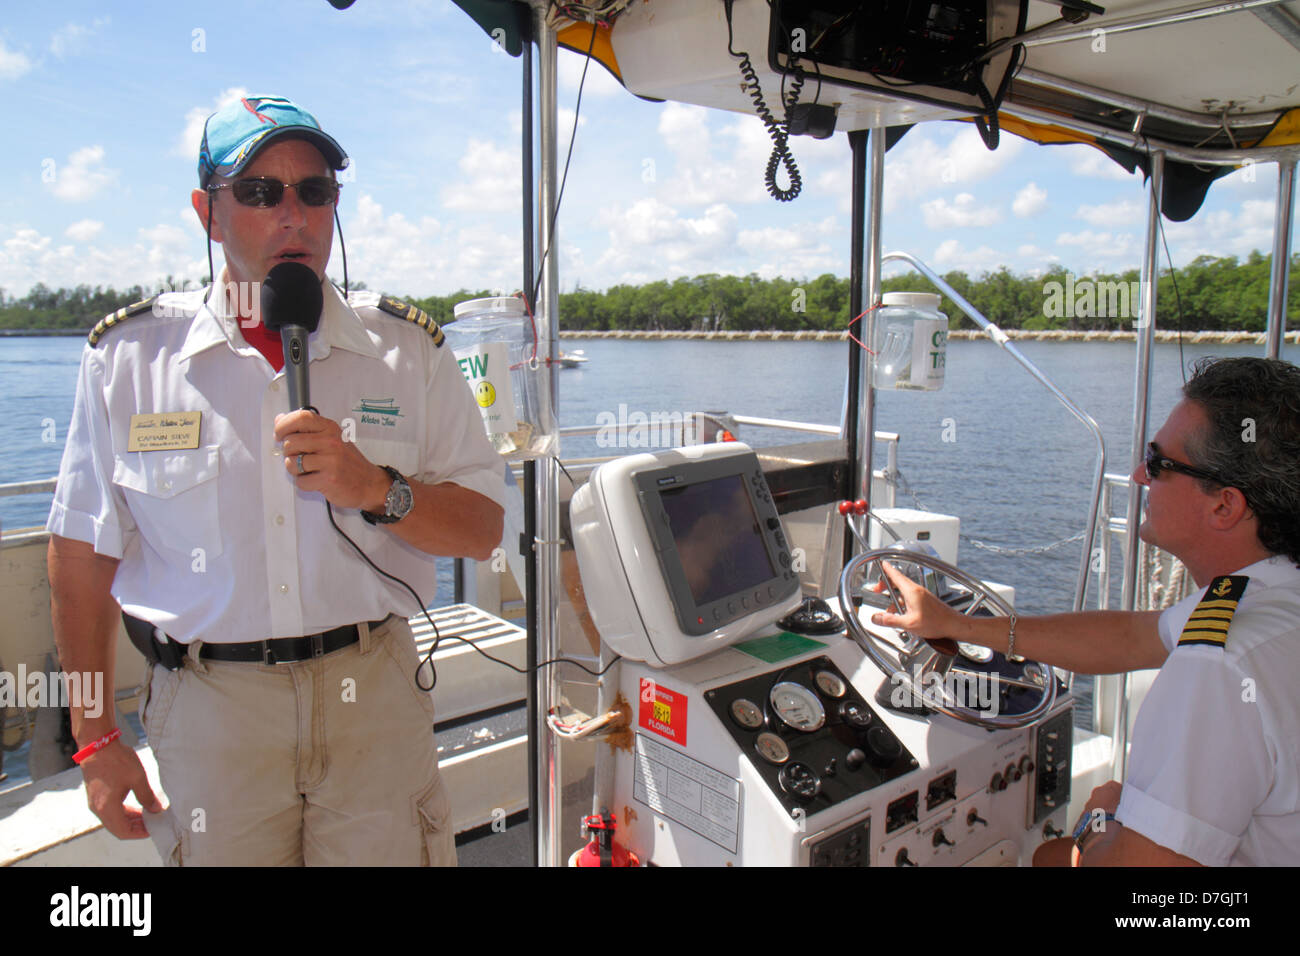 Pi. Fort Lauderdale Florida, Intracoastal the Water taxi, taxis, bateau, passagers passagers rider riders, équipage, guide, capitaine, pilote, homme hommes homme homme adulte Banque D'Images